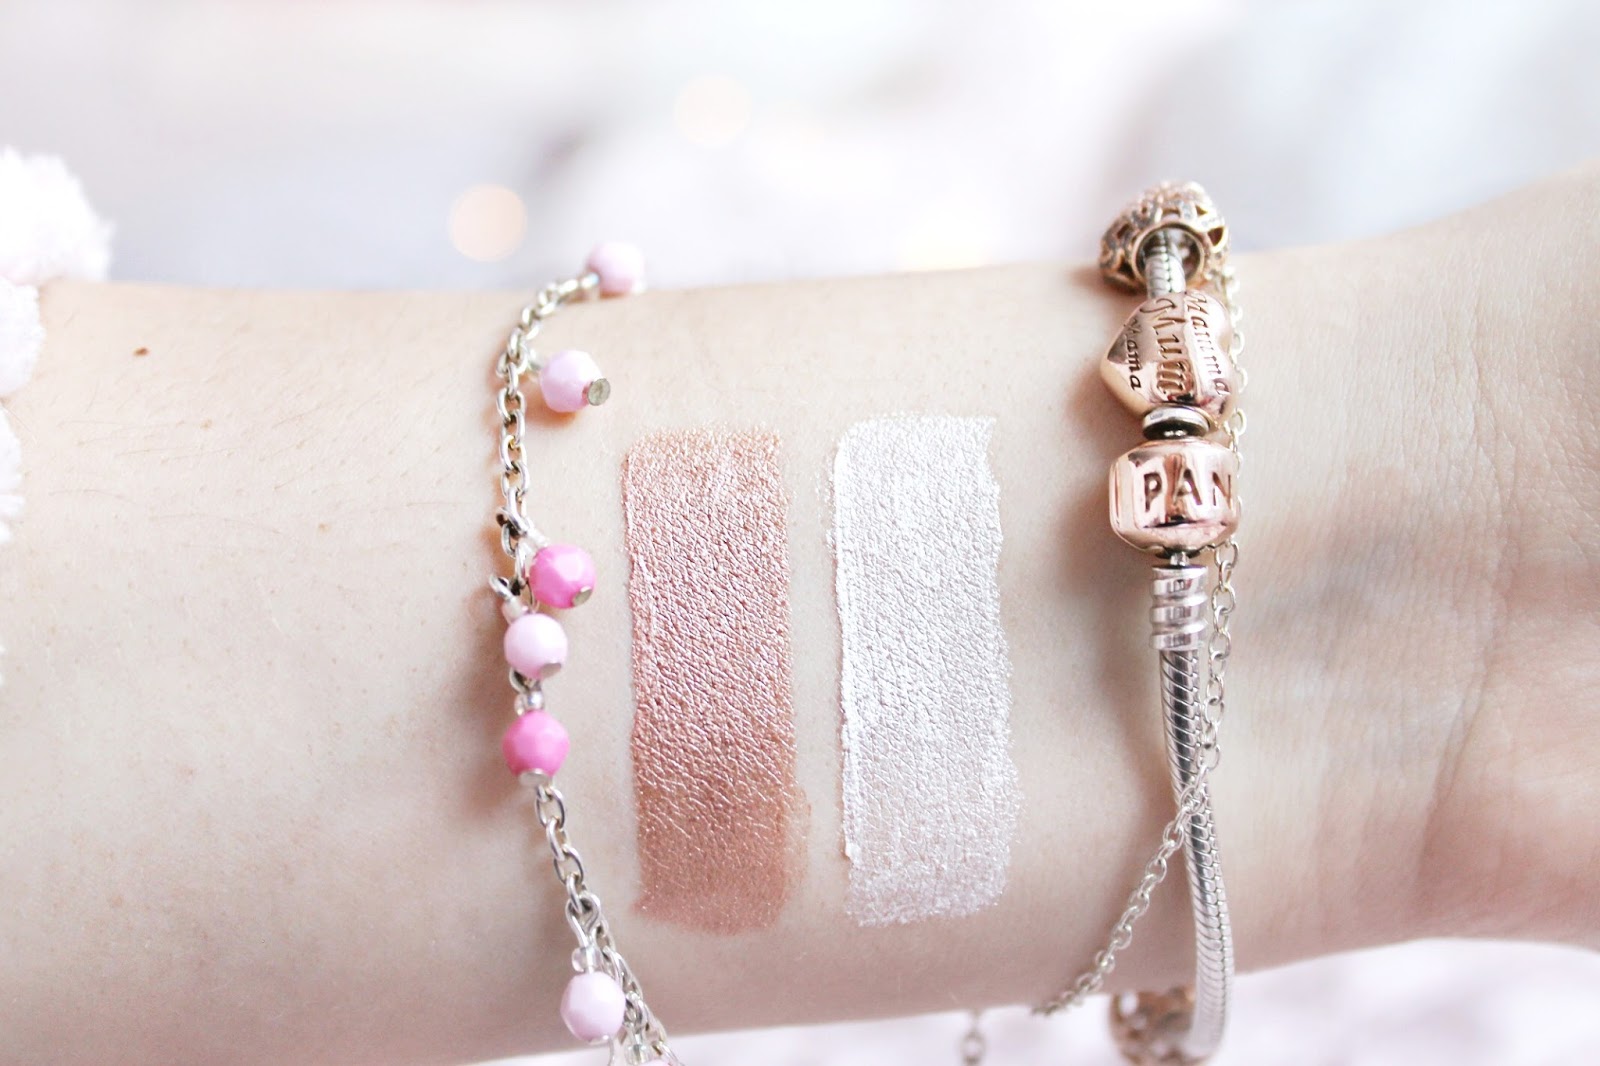 NYX Lid Lingerie eye tint review: Sweet Cloud and White Lace Romance